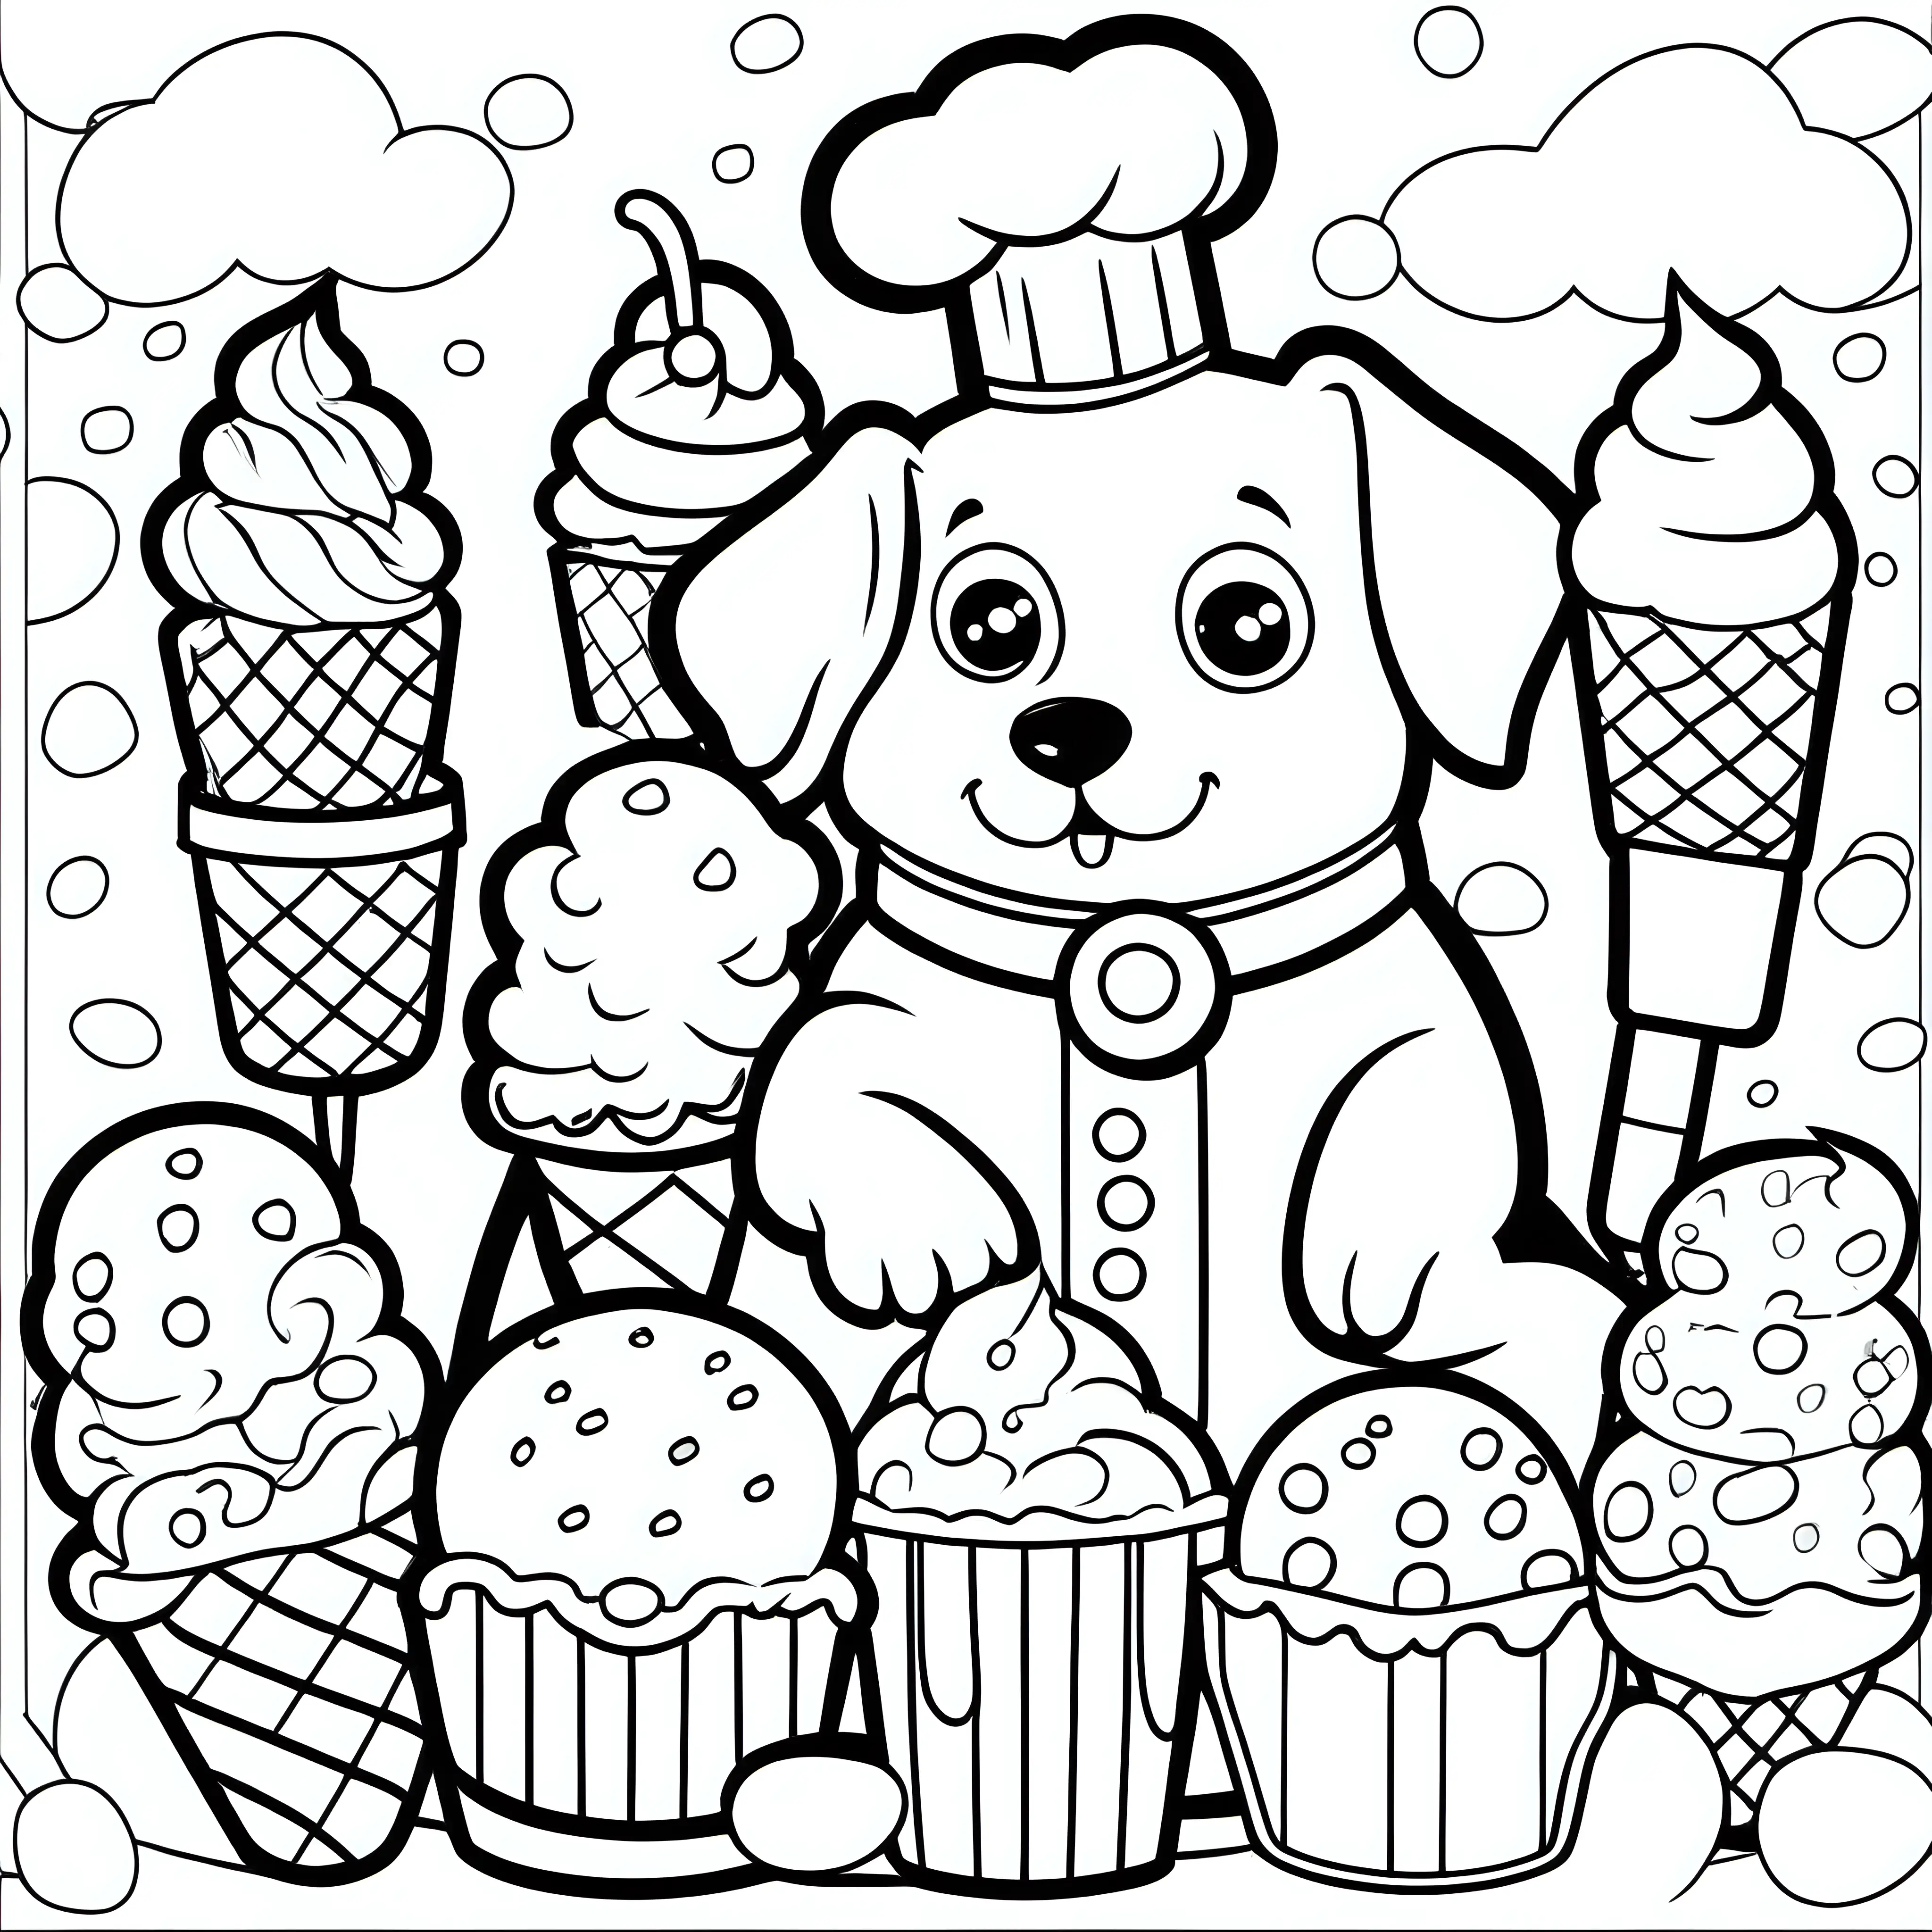 coloring book for kids, simple, adult coloring book, no detail, outline no color,   dog ice cream chef,  fill frame, edge to edge, clipart white background --ar 17:22